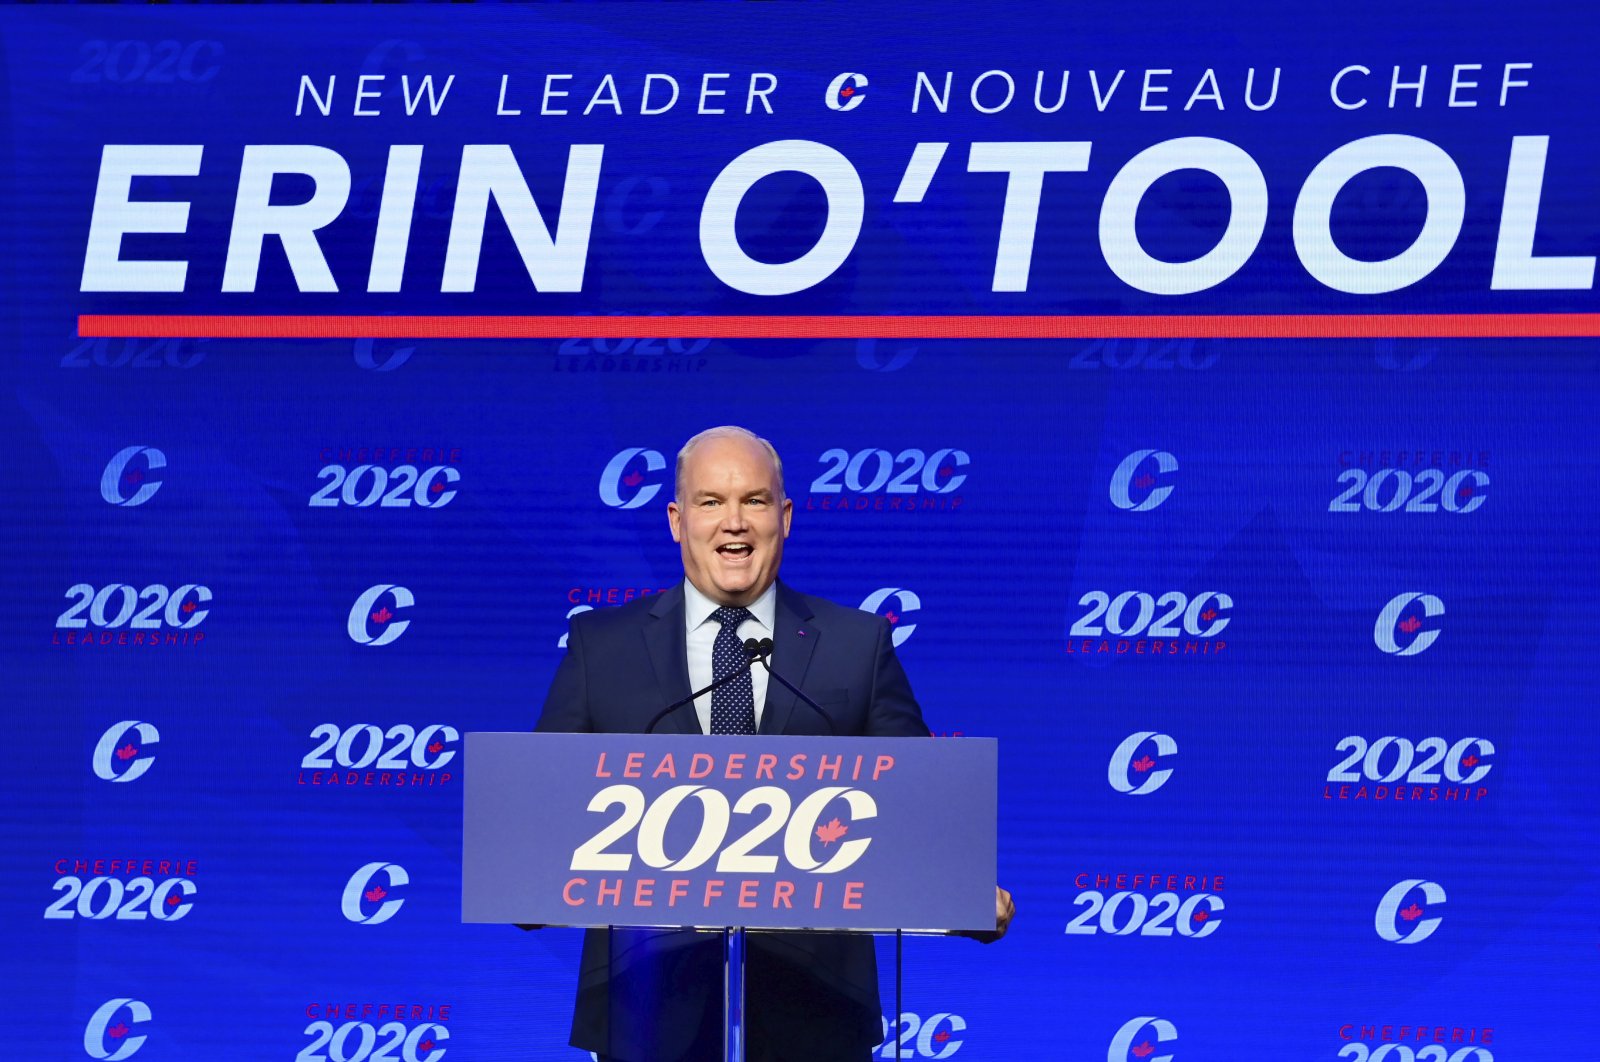 Conservative Party of Canada Leader Erin O'Toole speaks after his win at the 2020 Leadership Election in Ottawa, Ontario, Aug. 23, 2020. (AP Photo)